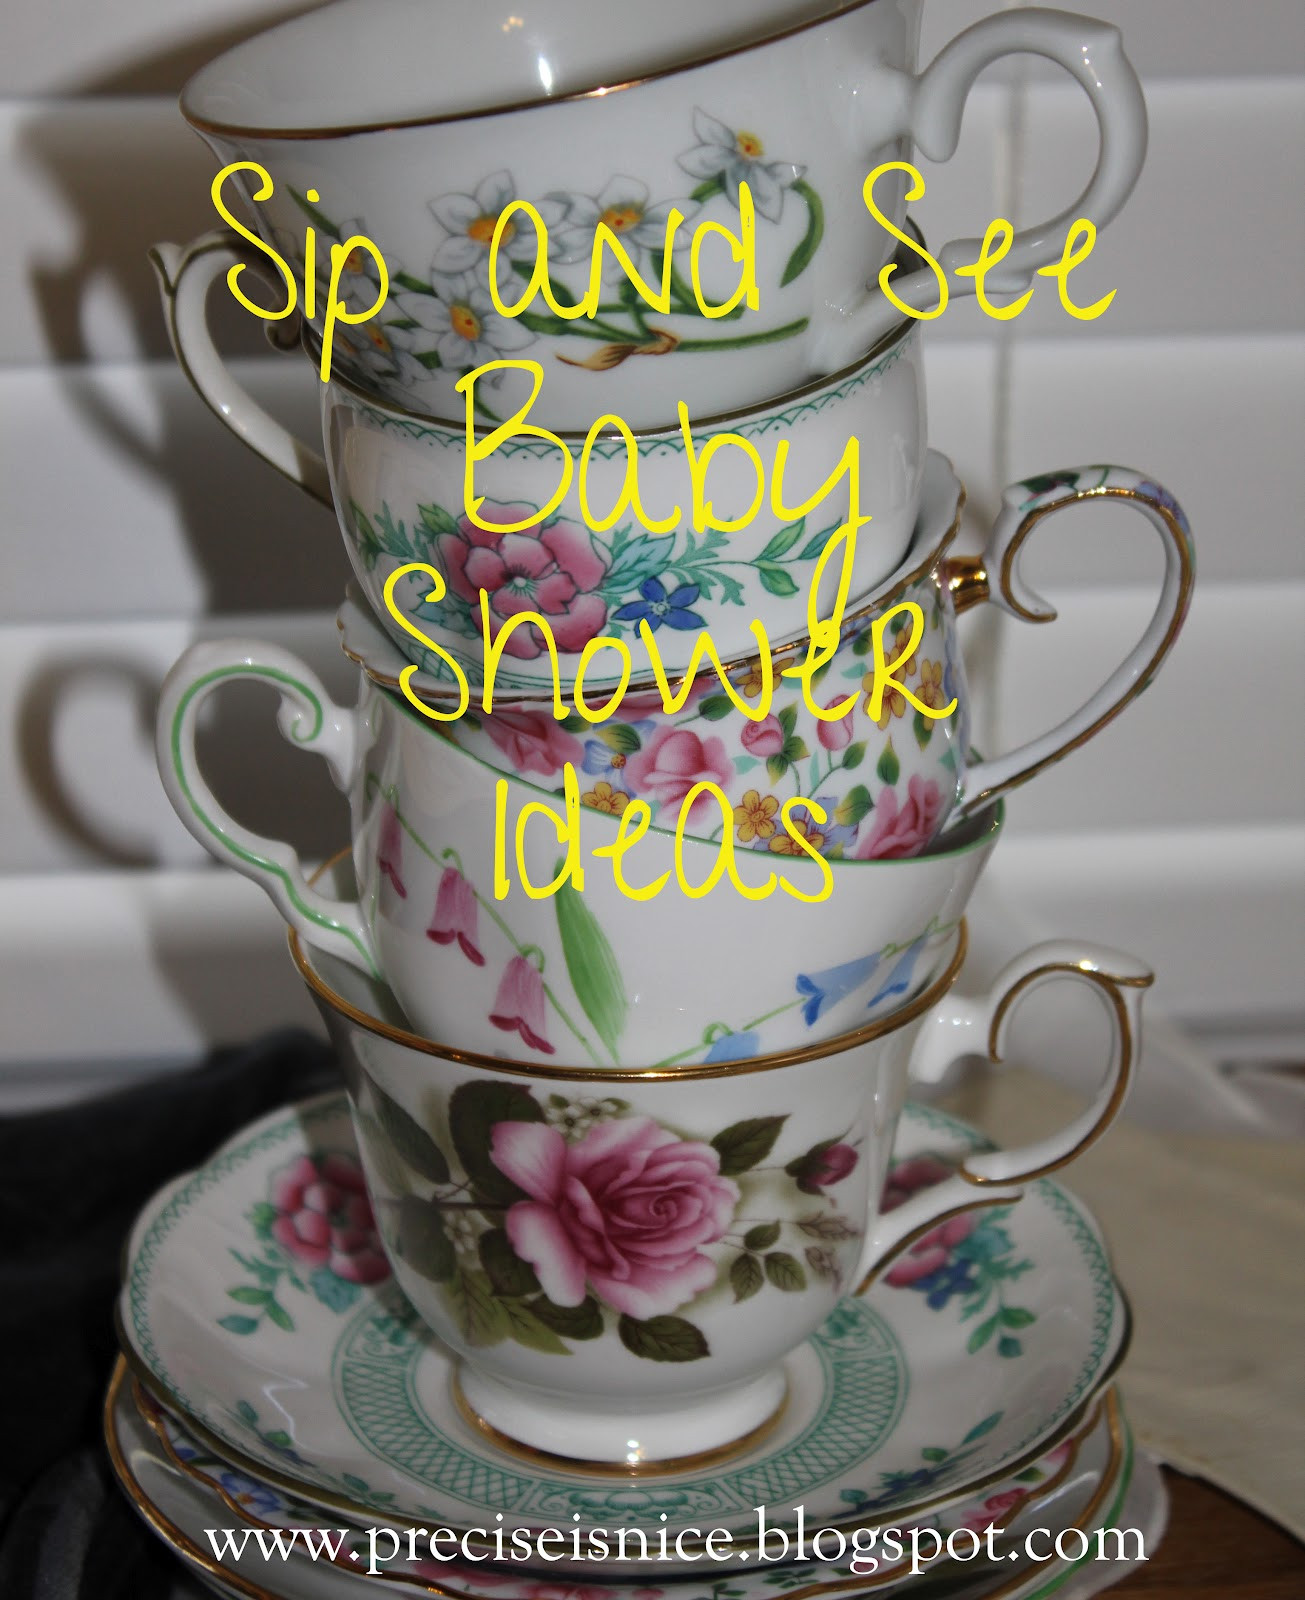 Tea Party Shower Ideas
 Precise is Nice Sip and See Baby Shower tea party style